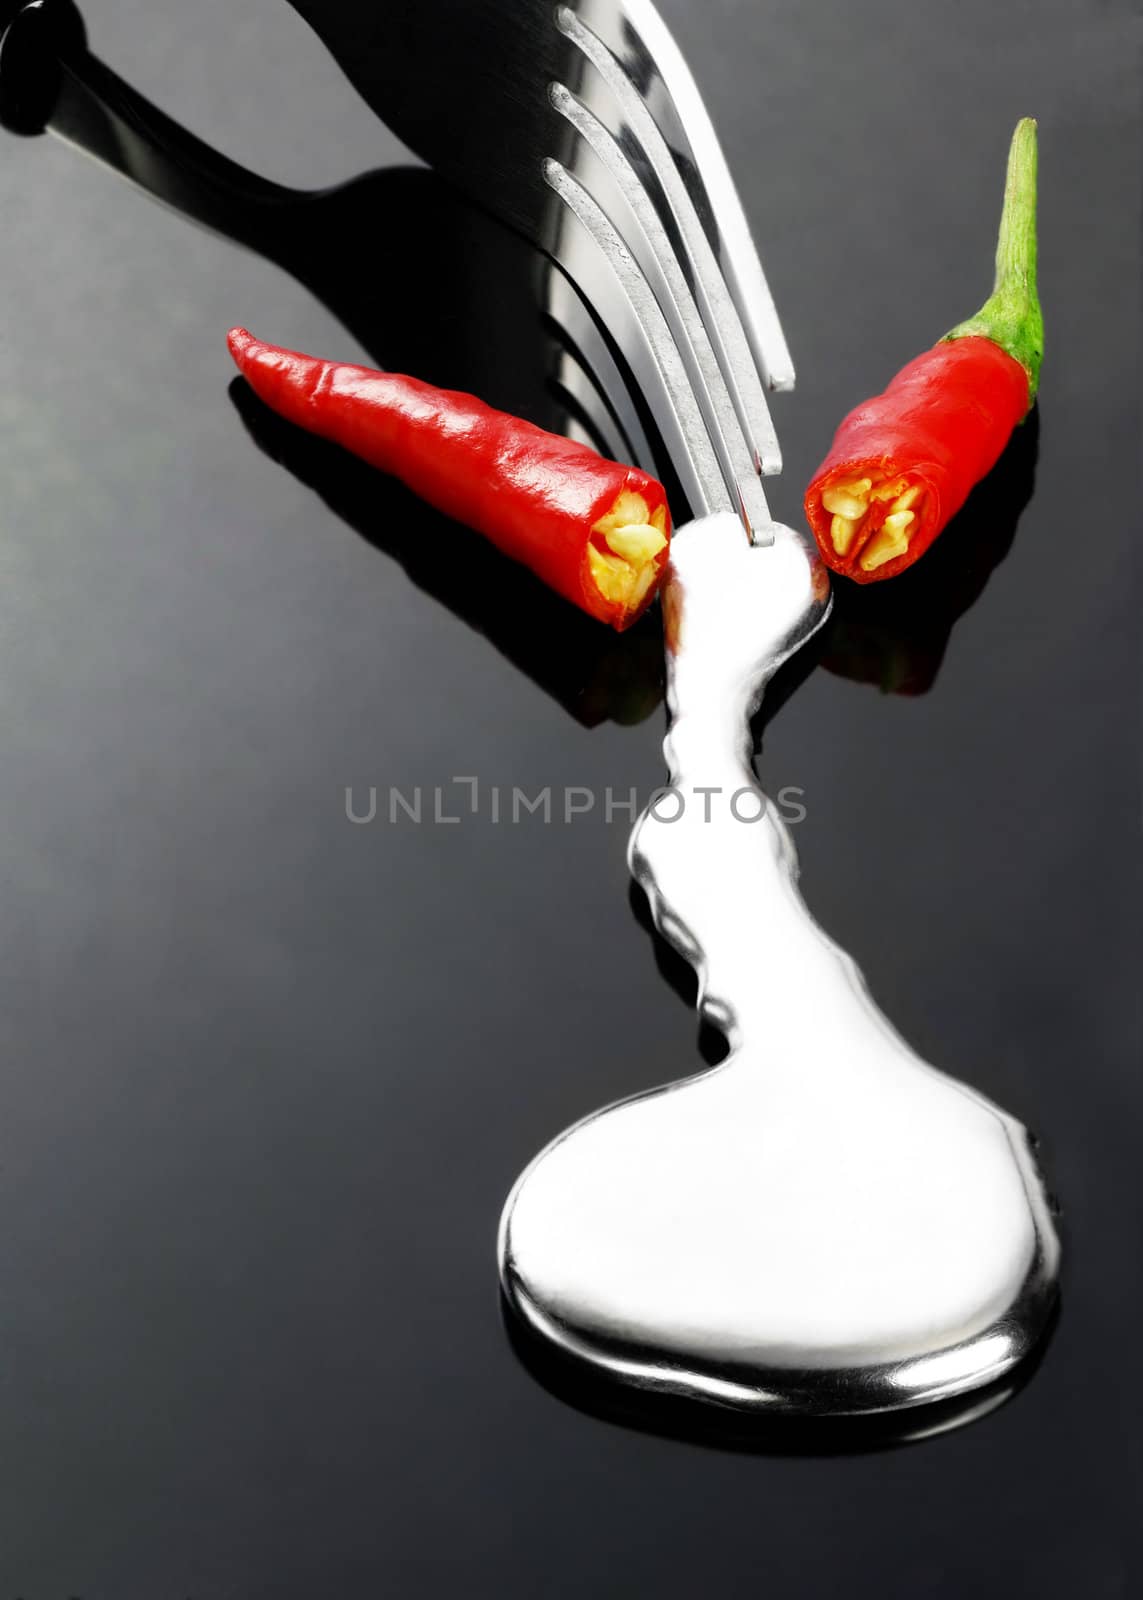 red chili pepper melting a fork while be cutted on a black stone